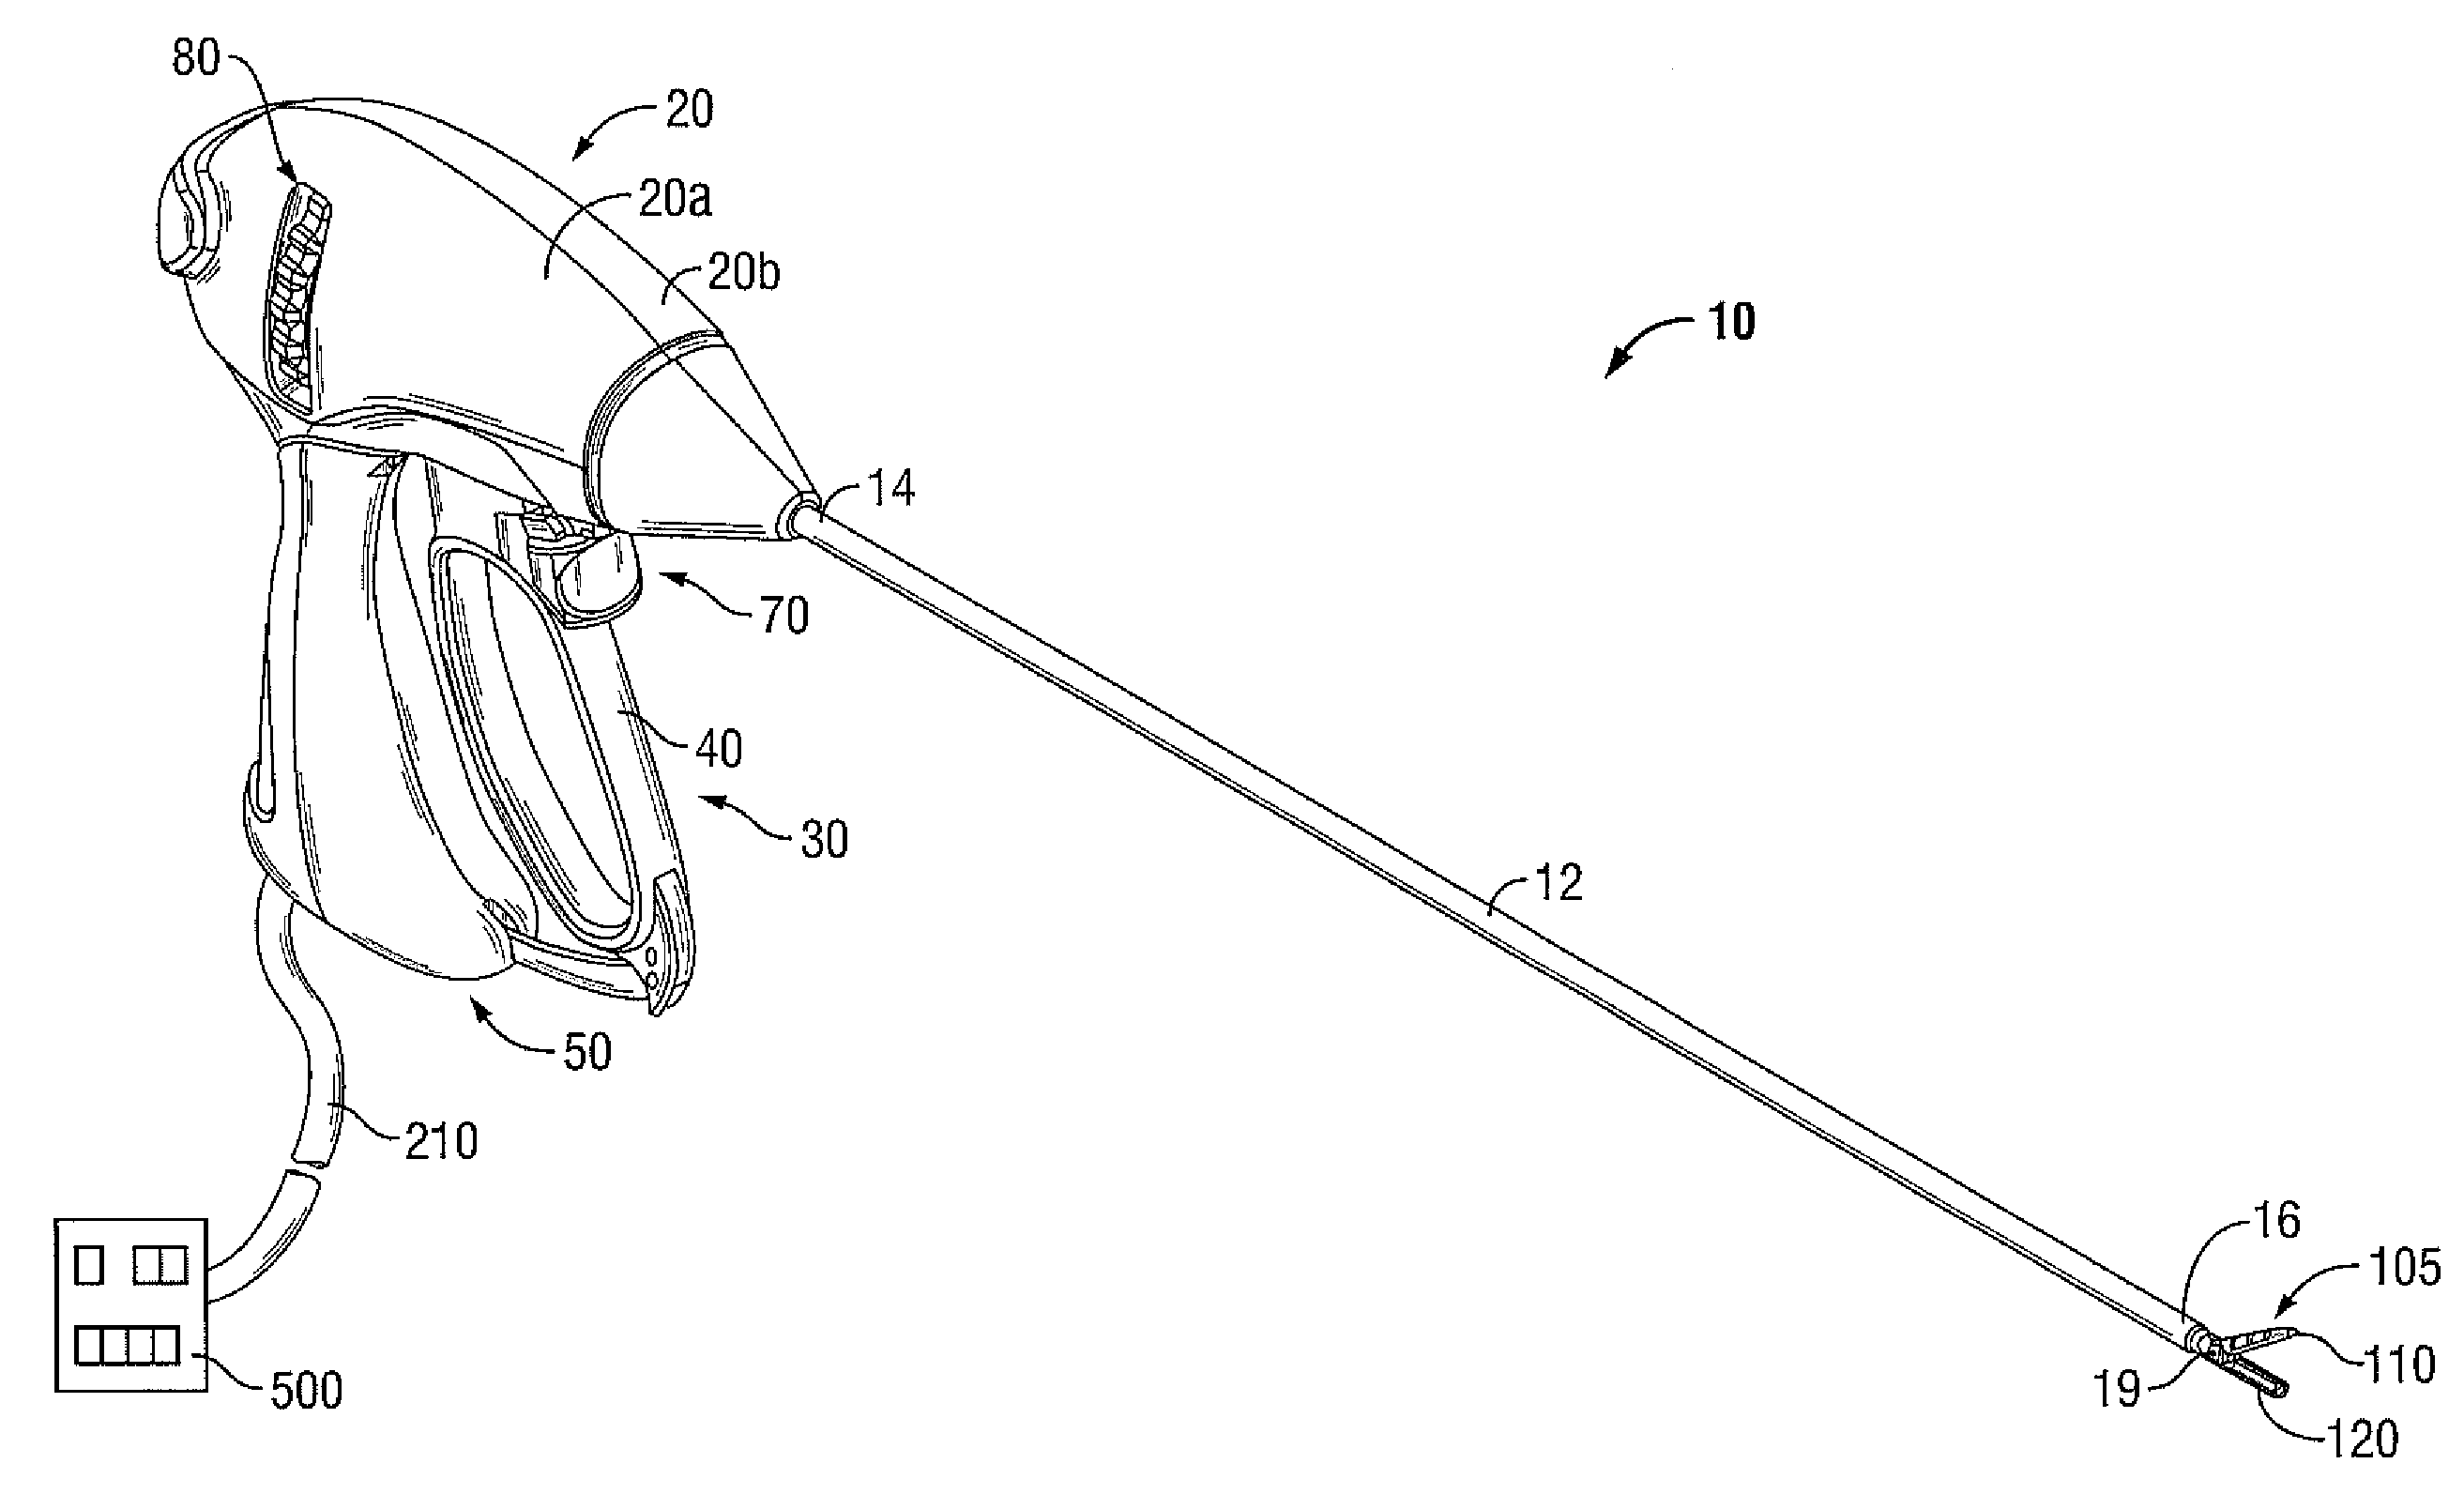 Ultrasound Device for Precise Tissue Sealing and Blade-Less Cutting